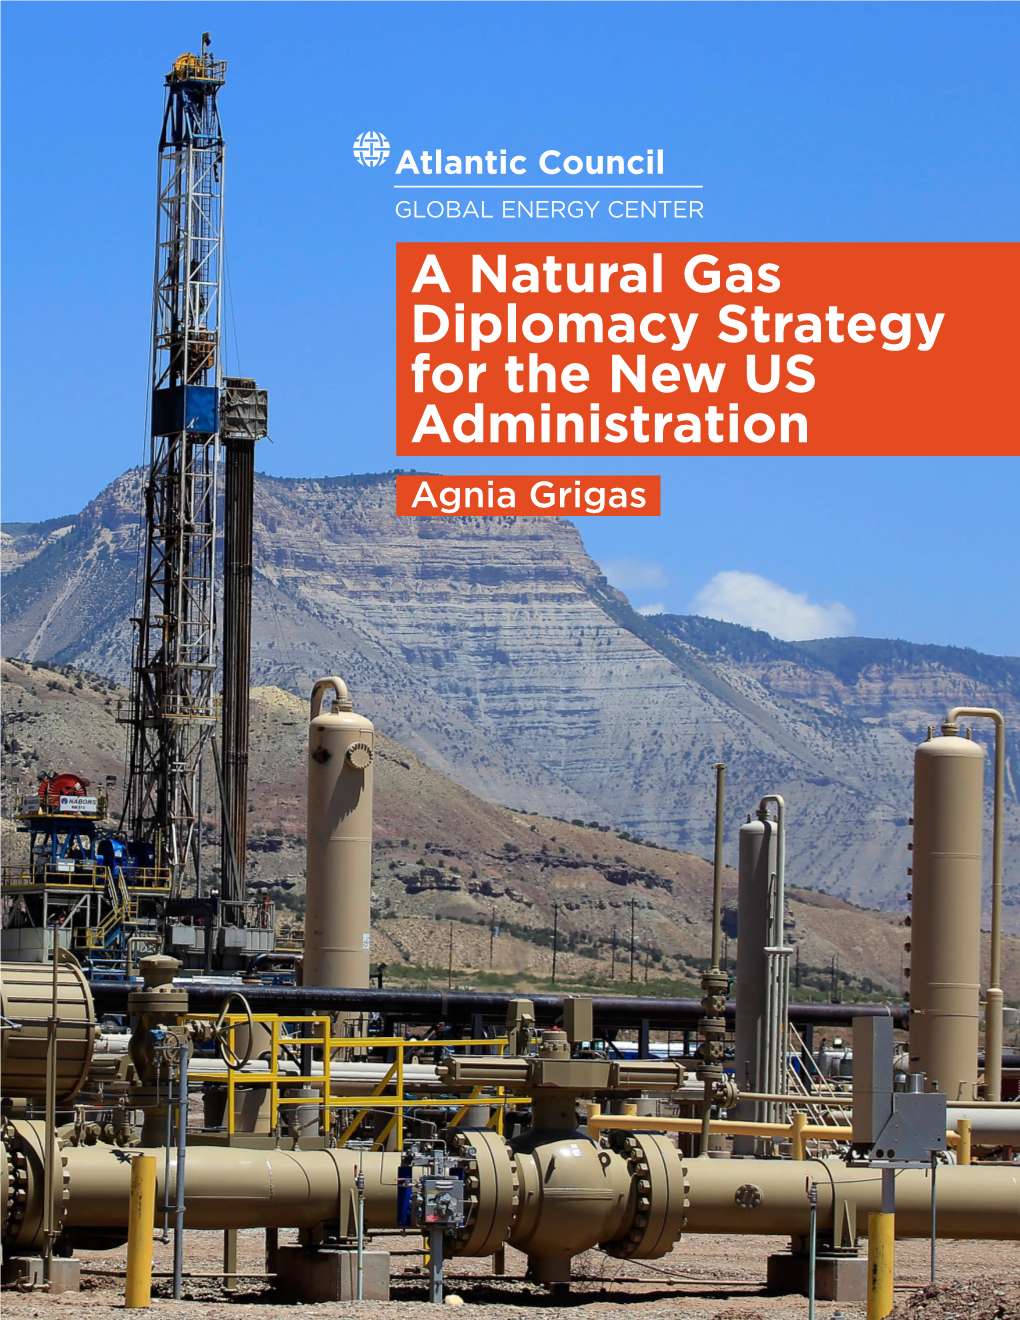 A Natural Gas Diplomacy Strategy for the New US Administration Agnia Grigas a Natural Gas Diplomacy Strategy for the New US Administration Agnia Grigas